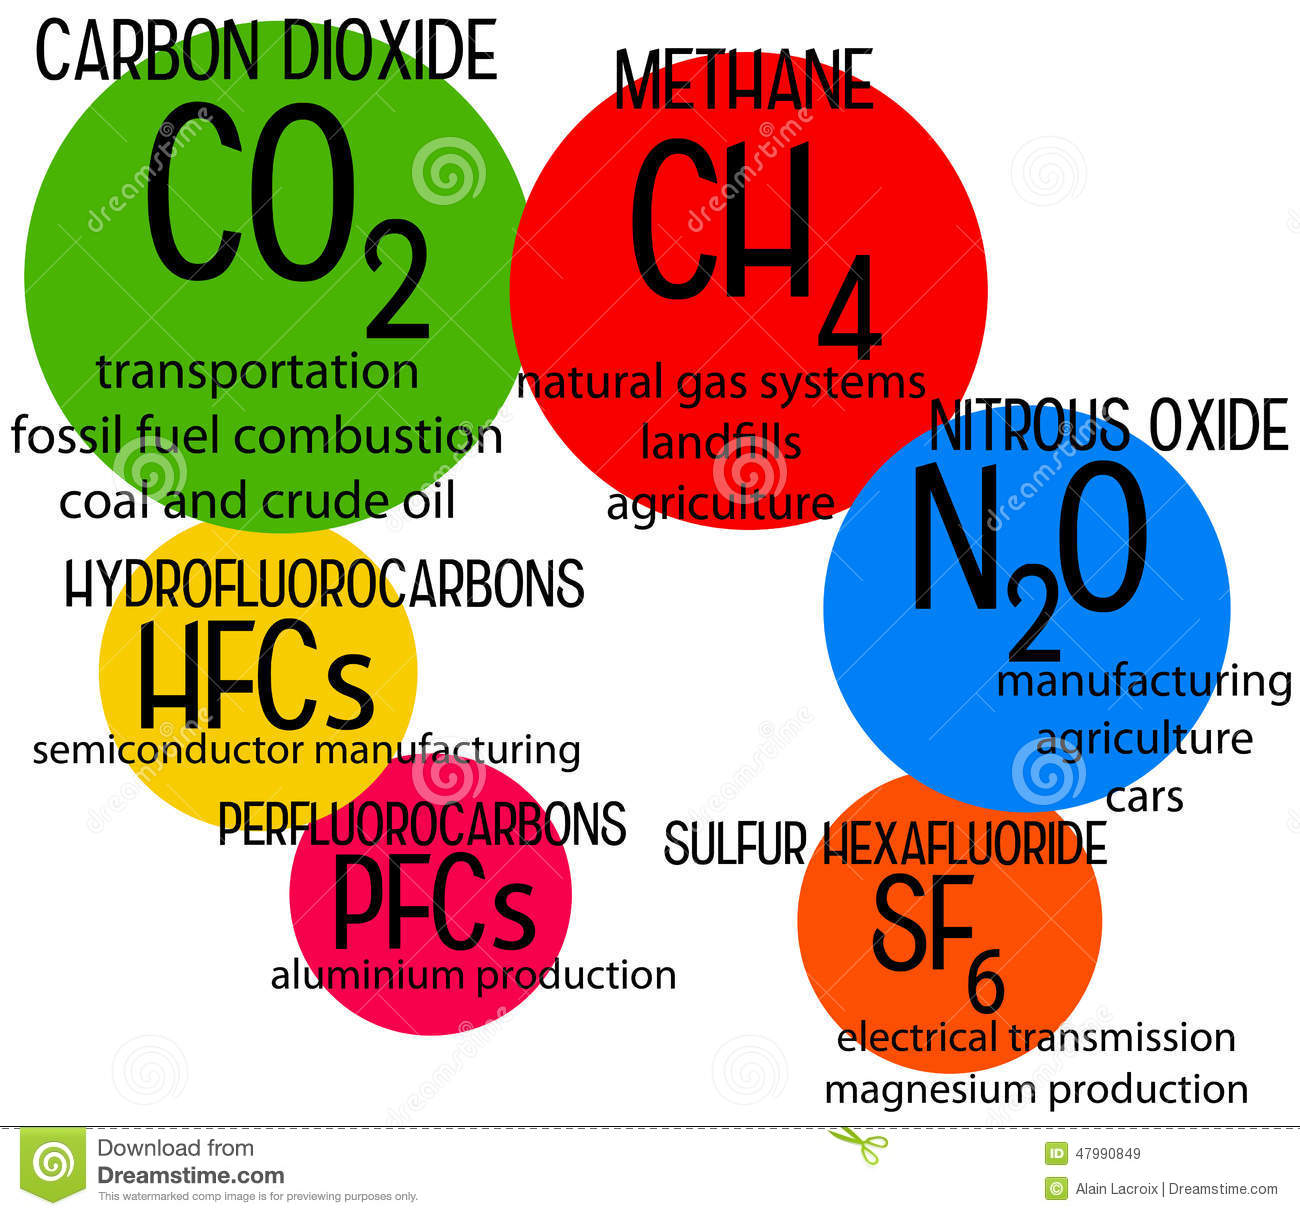 Overview Of Several Types Of Greenhouse Gases Influencing Global